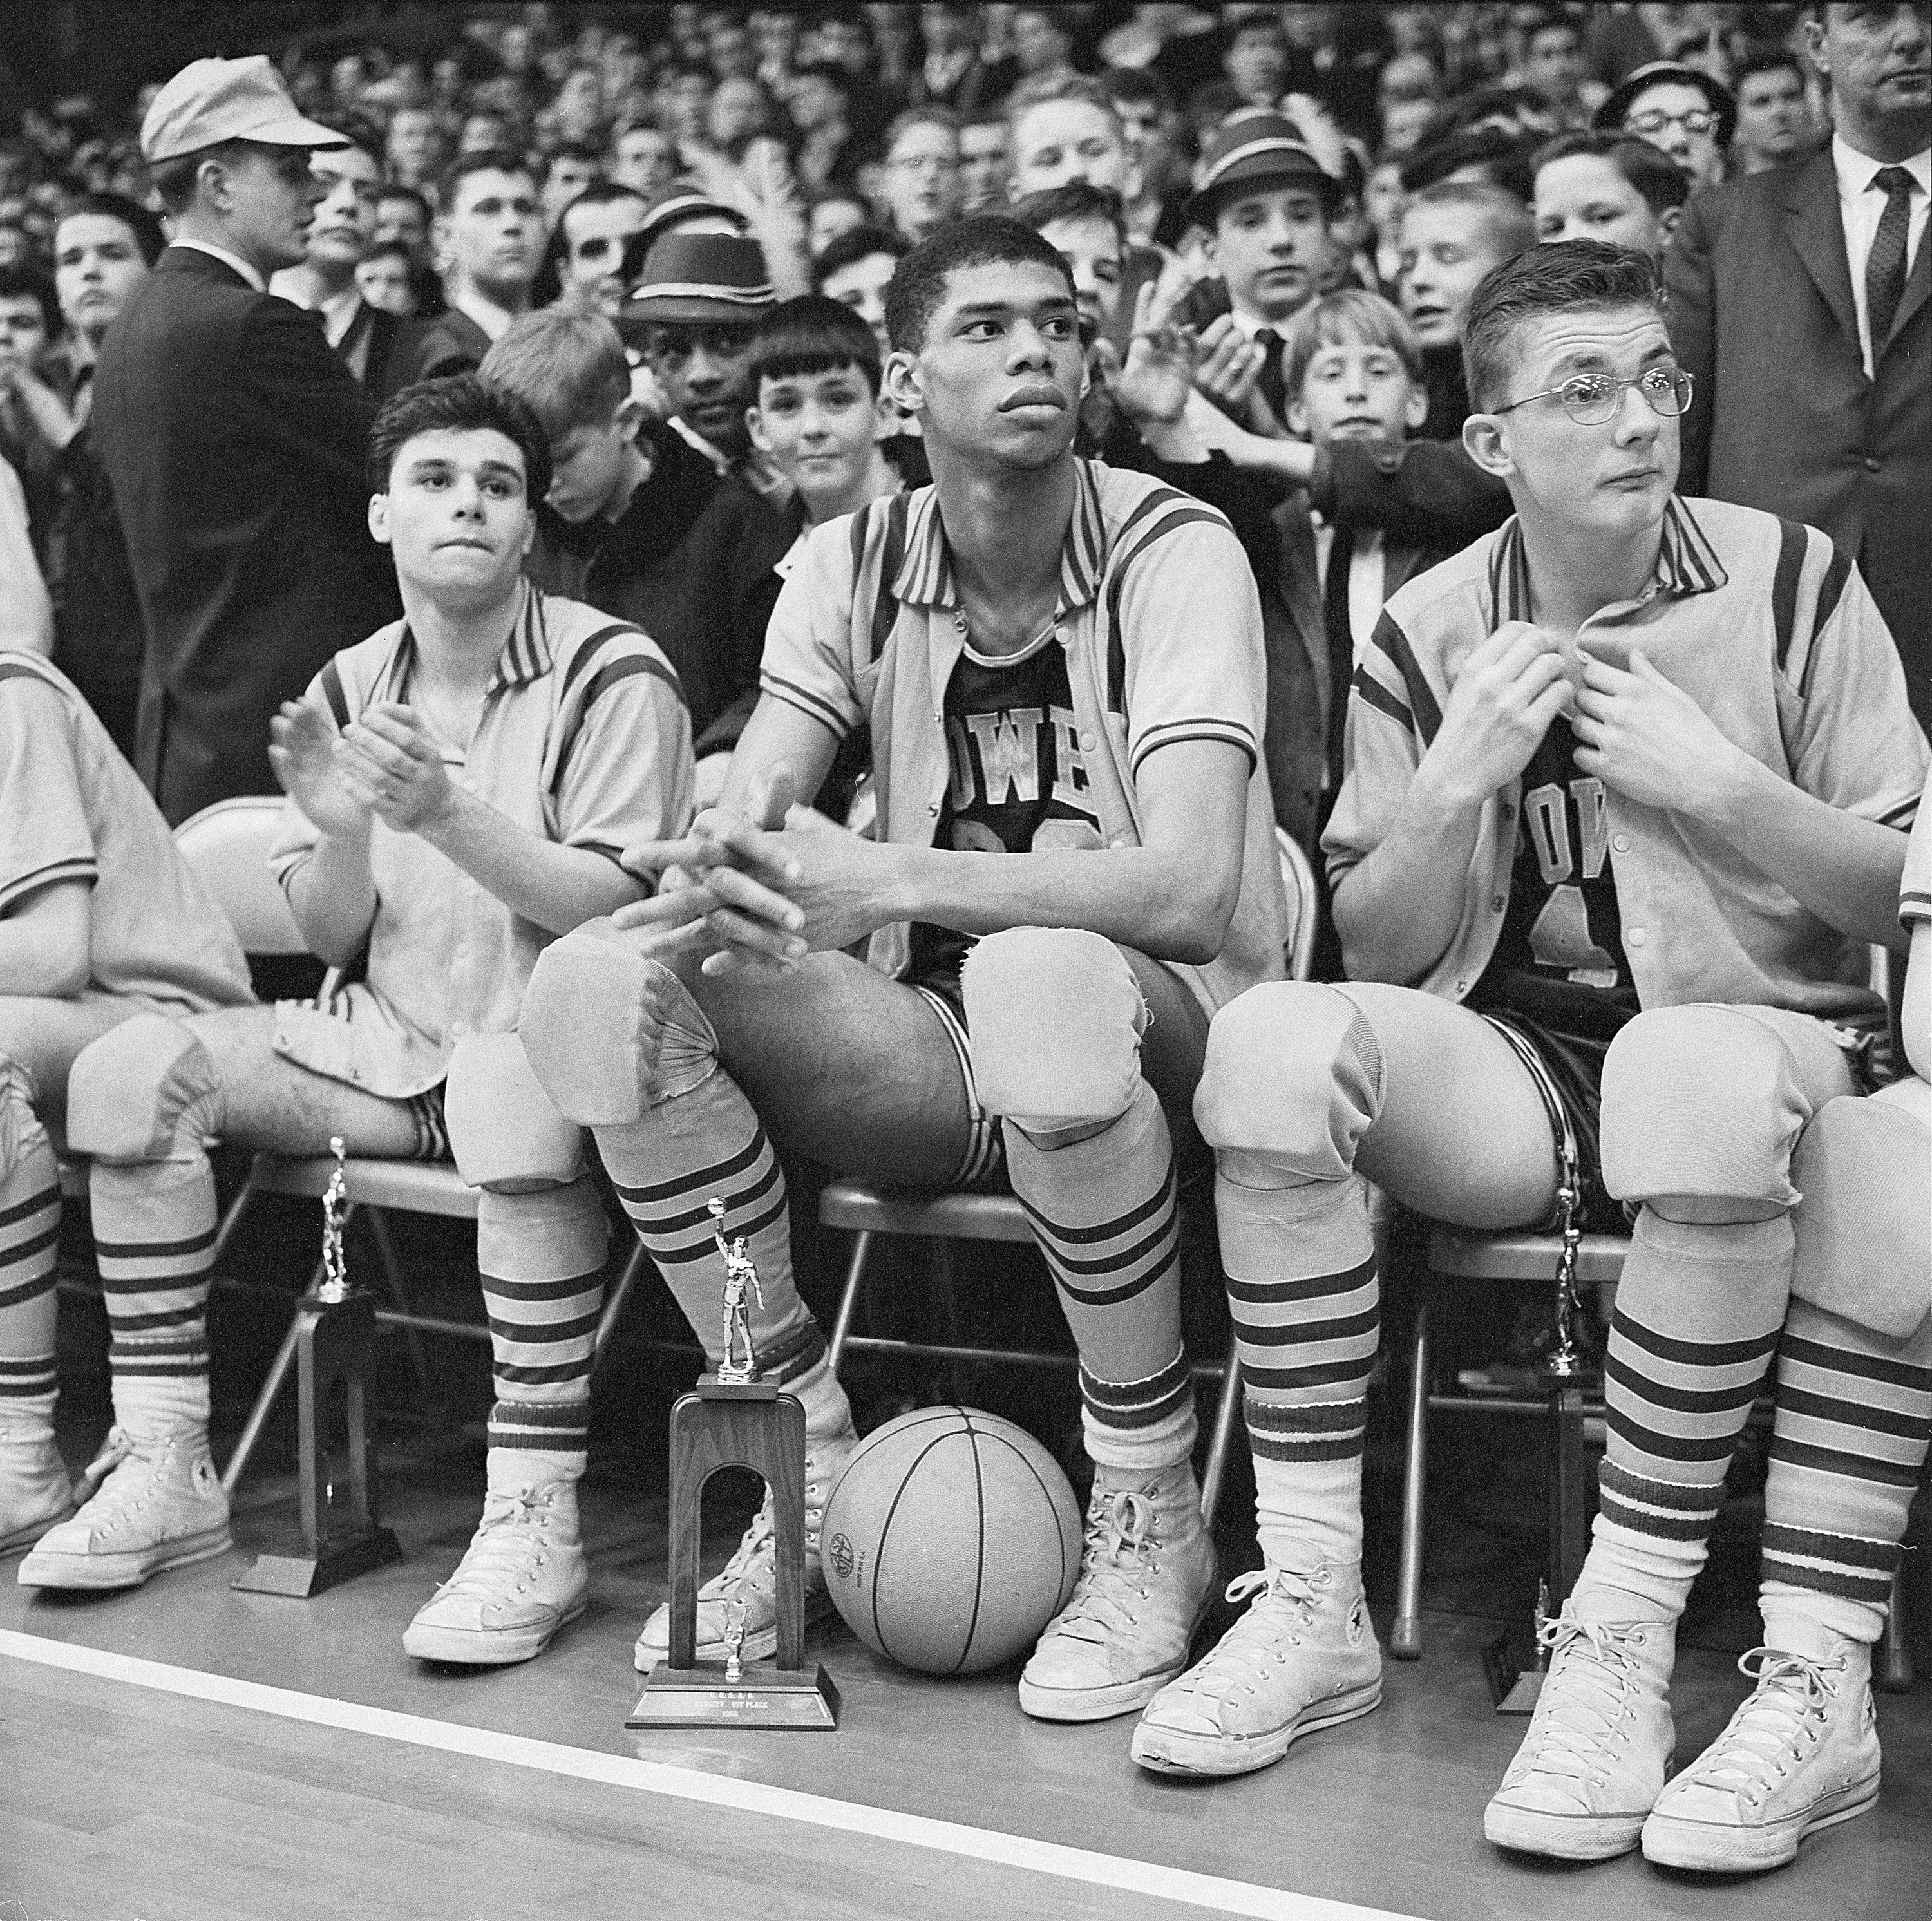 A young Kareem Abdul-Jabbar sitting on the sidelines of a basketball game with a trophy